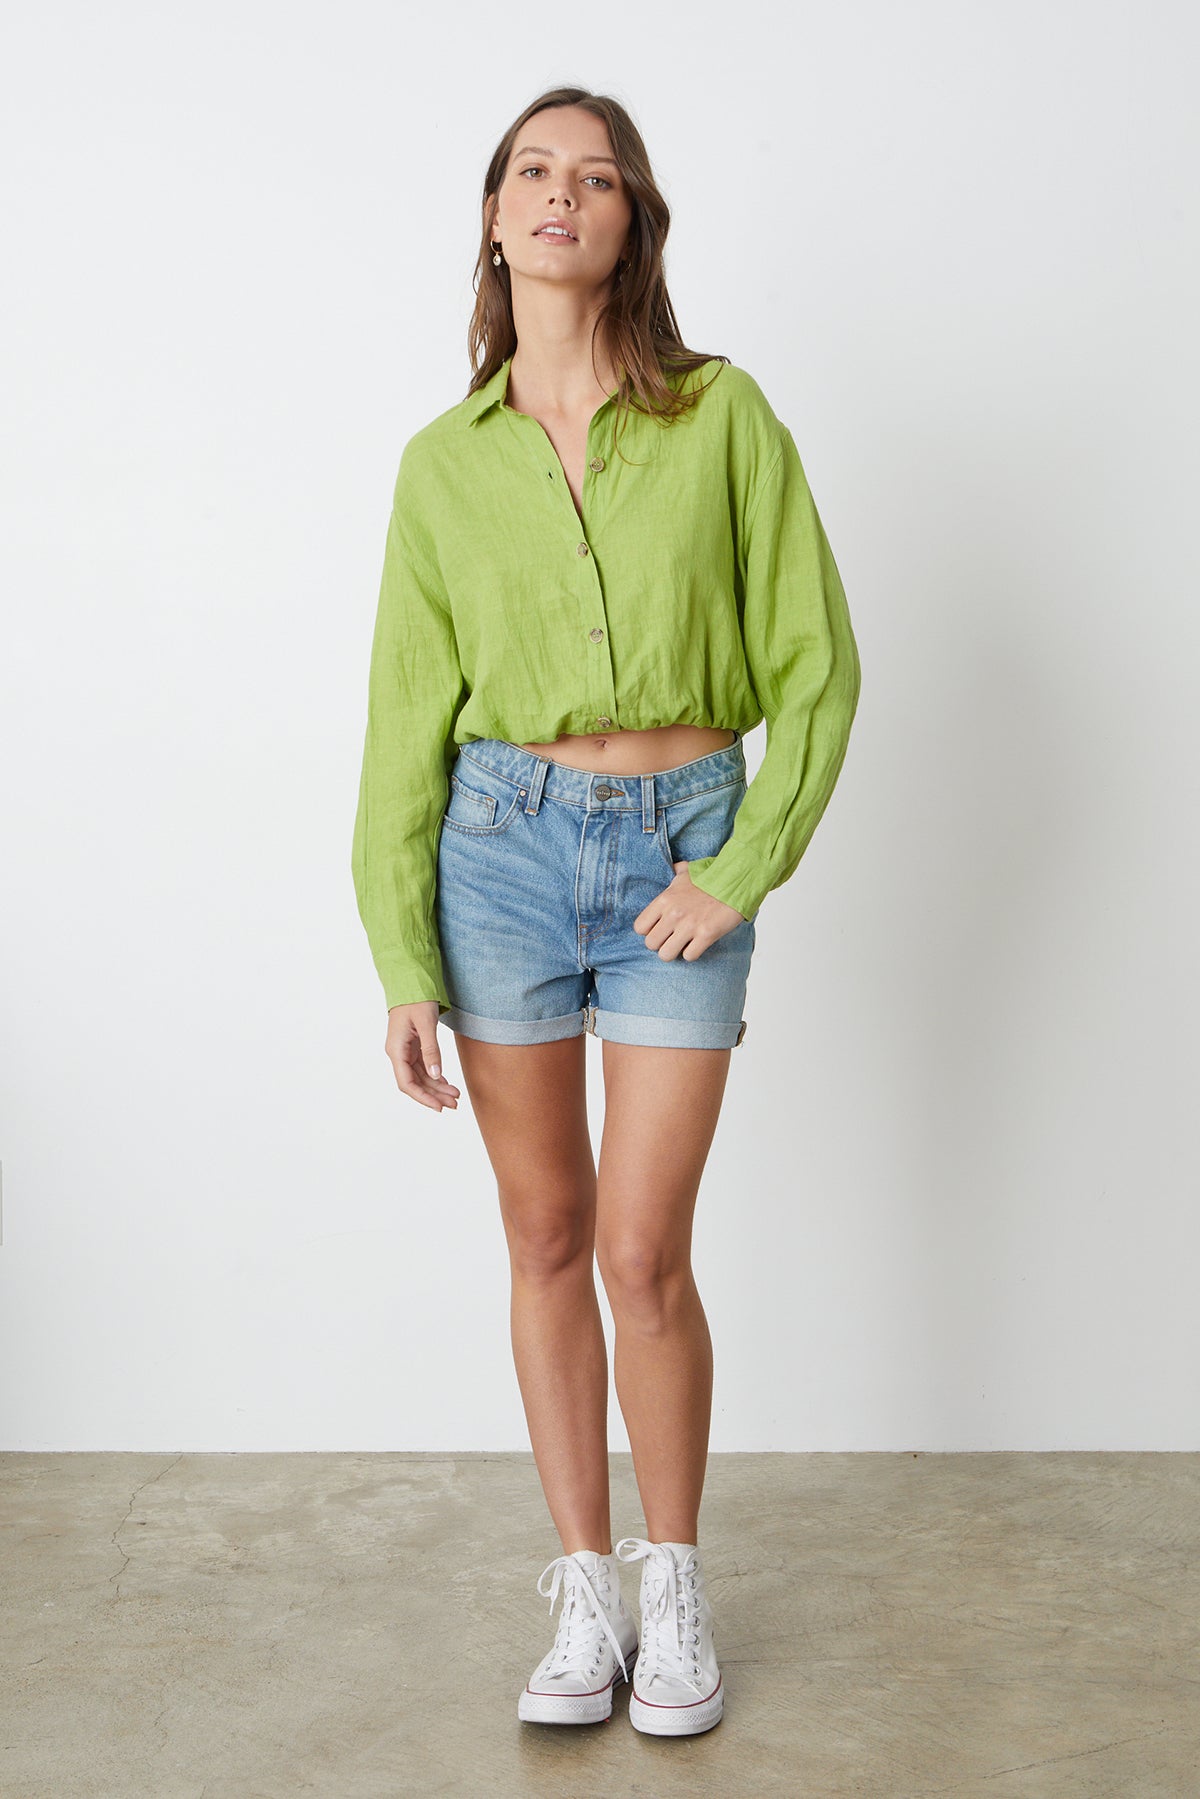 The model is wearing a Velvet by Graham & Spencer CROPPED SHIRT and denim shorts.-26296062509249